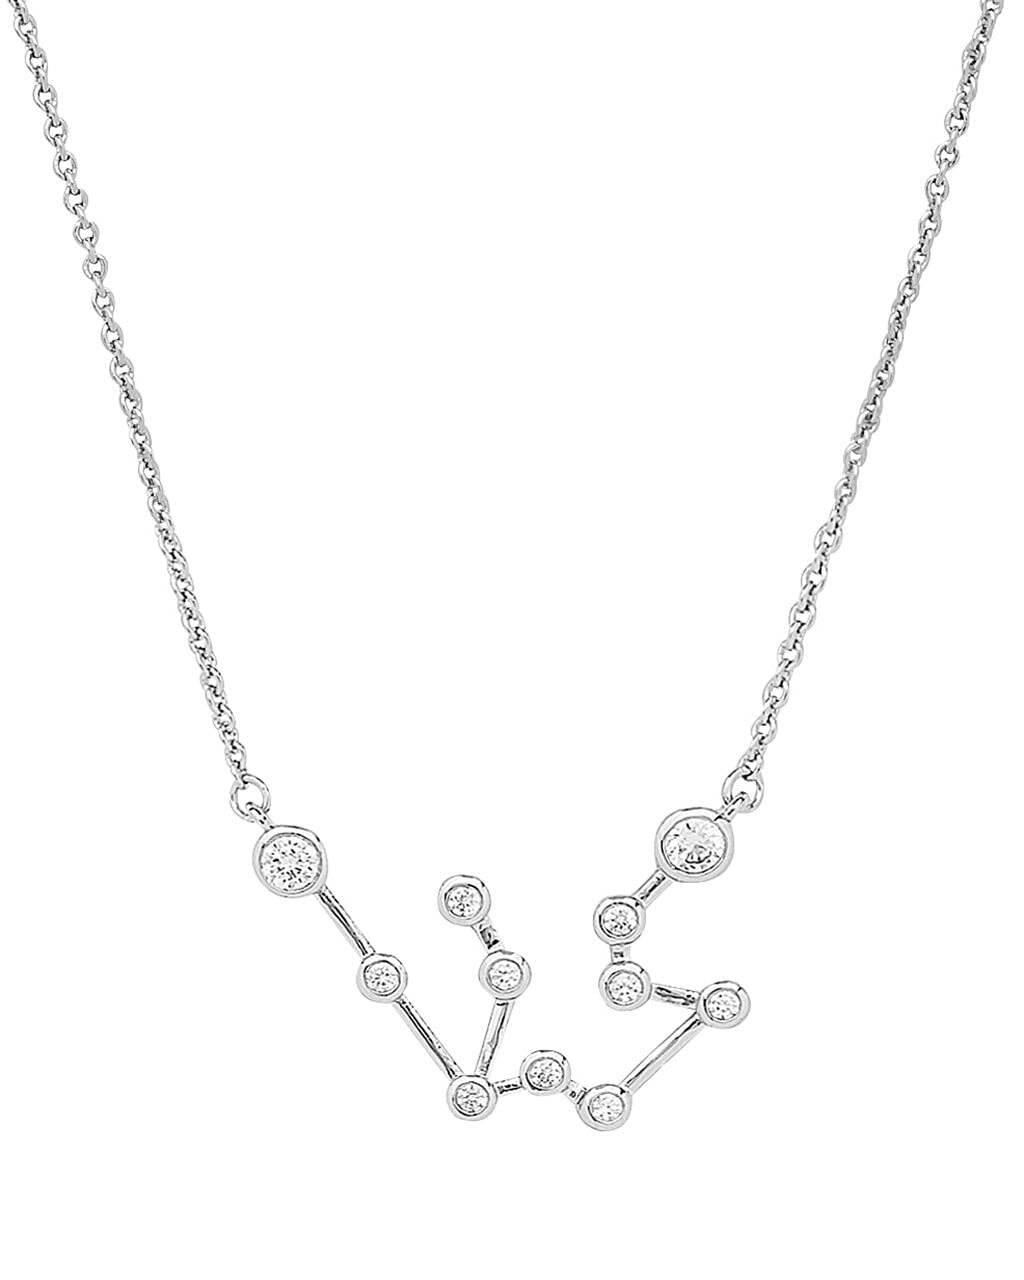 'When Stars Align' Constellation Necklace Necklace Sterling Forever Silver Aquarius (Jan 20 - Feb 18) 